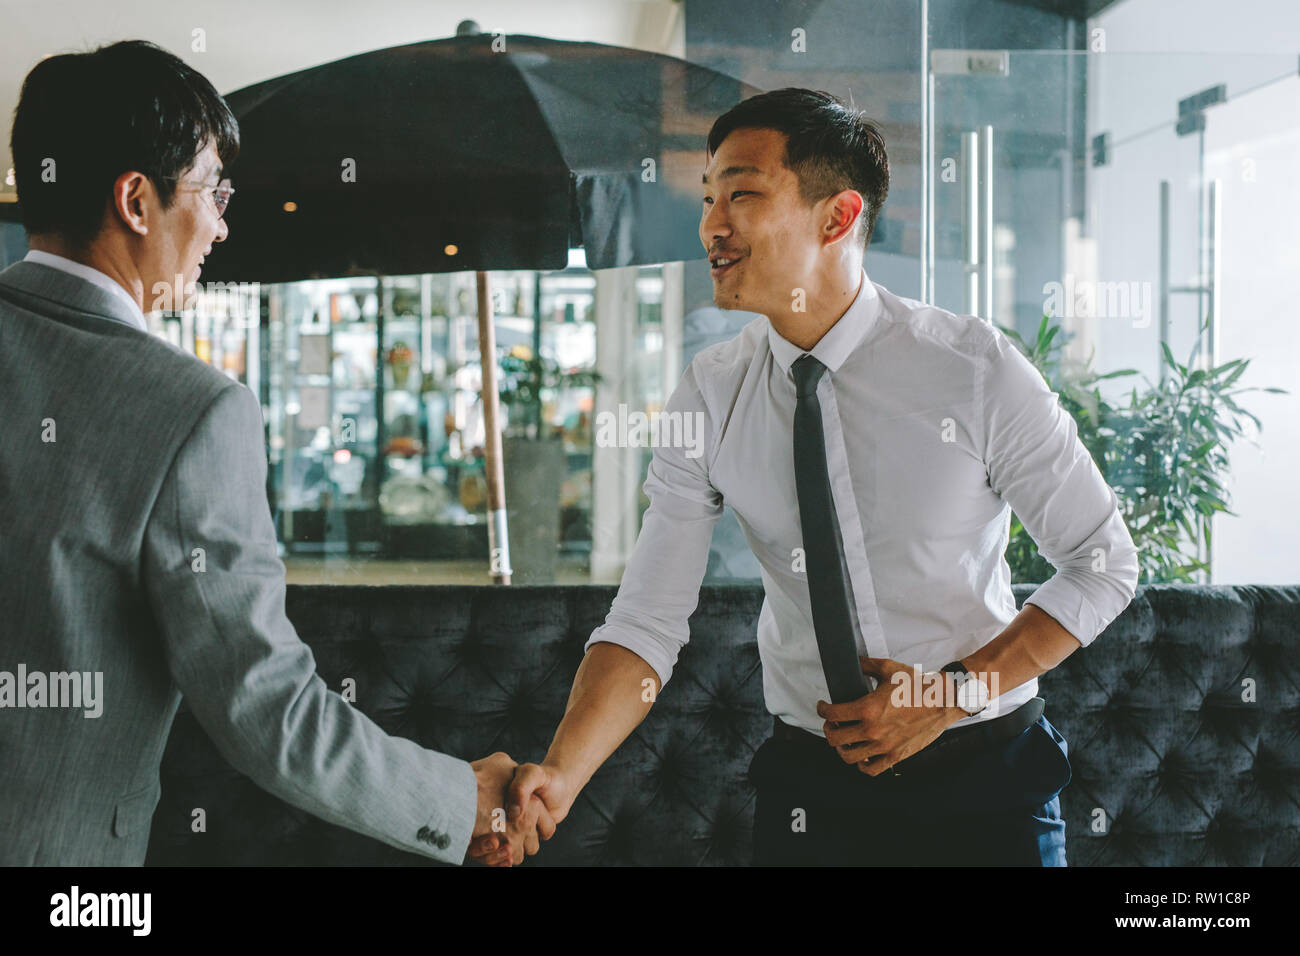 Asian business executive meeting a client at a coffee shop. Korean business people greeting each other with a handshake. Stock Photo